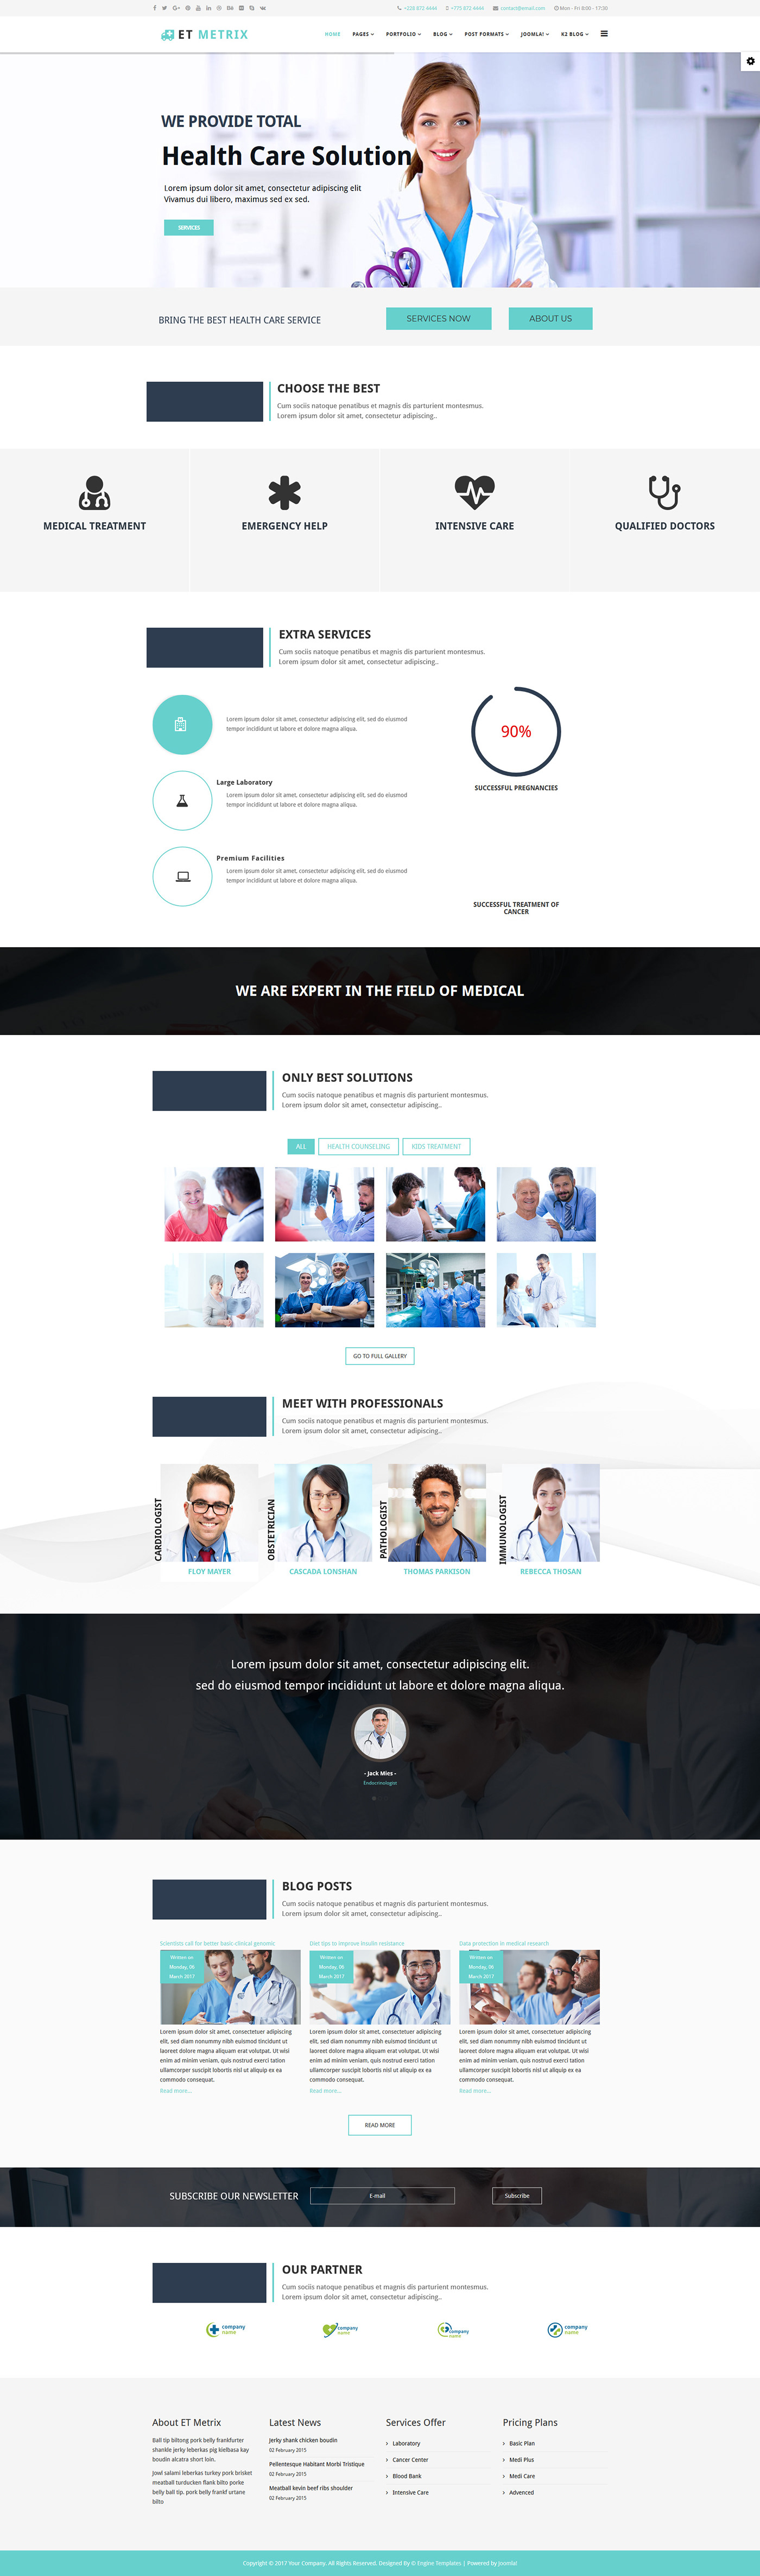 joomla joomla template Medical Joomla Template joomla medical template